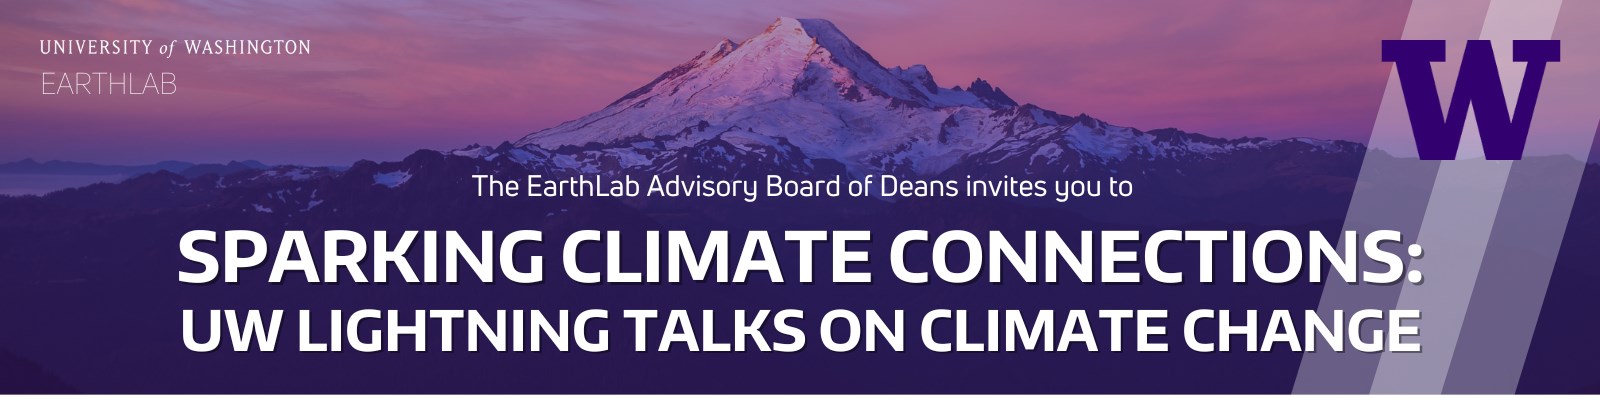 In-Person Reception for "Sparking Climate Connections: UW Virtual Talks on Climate Change"